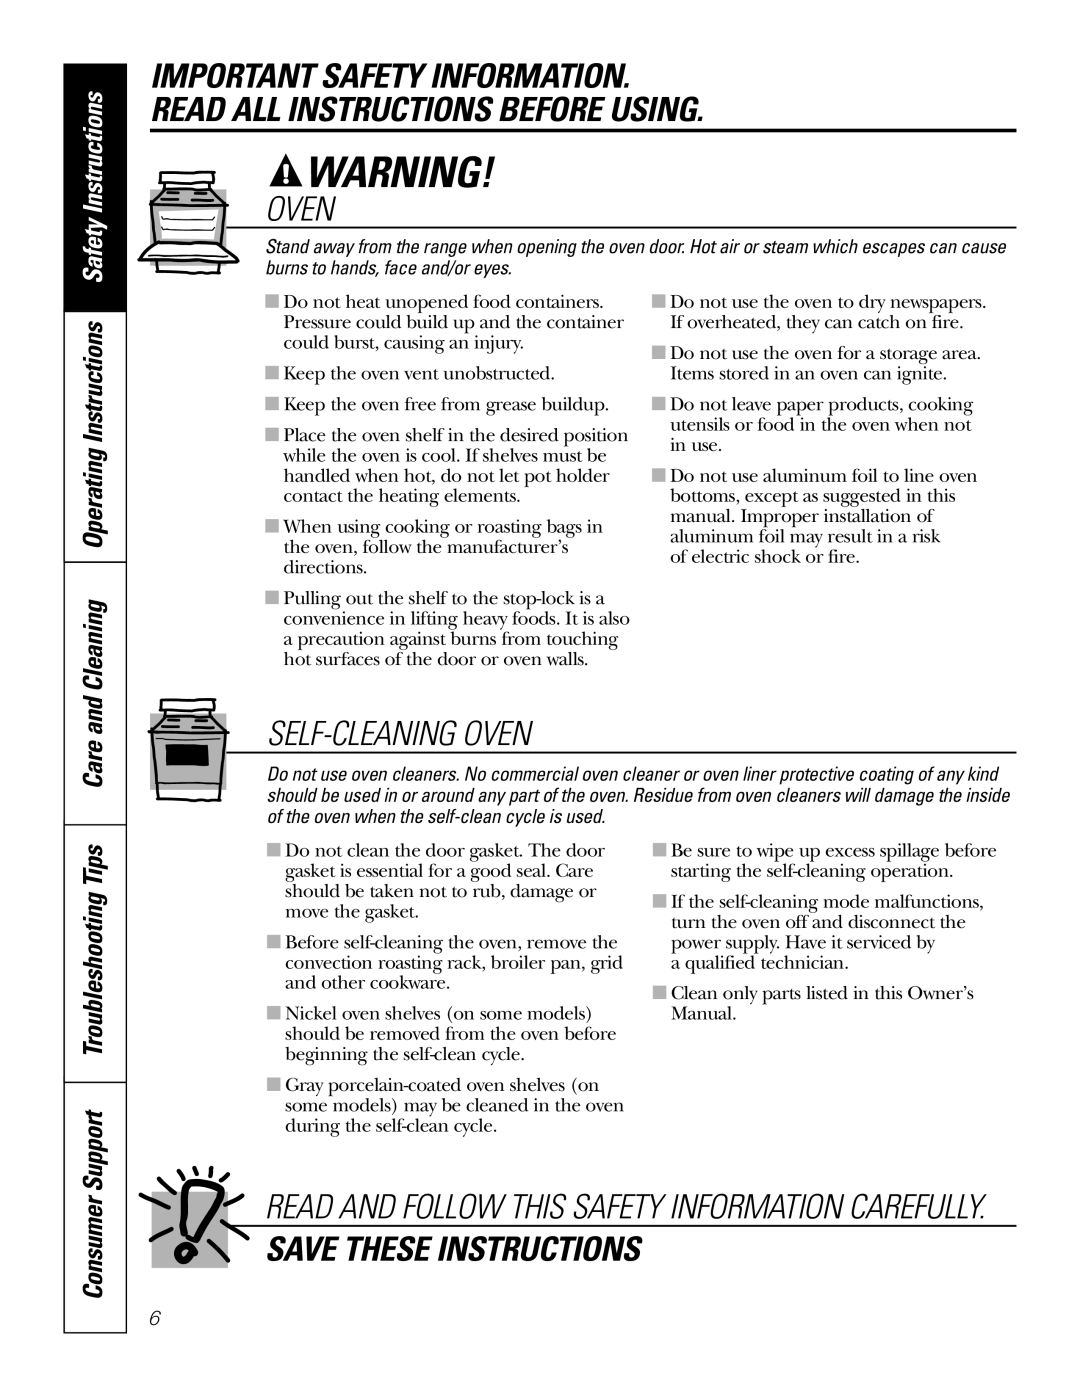 GE JBP91 Self-Cleaning Oven, Save These Instructions, Care, and Cleaning Operating Instructions, Safety Instructions 